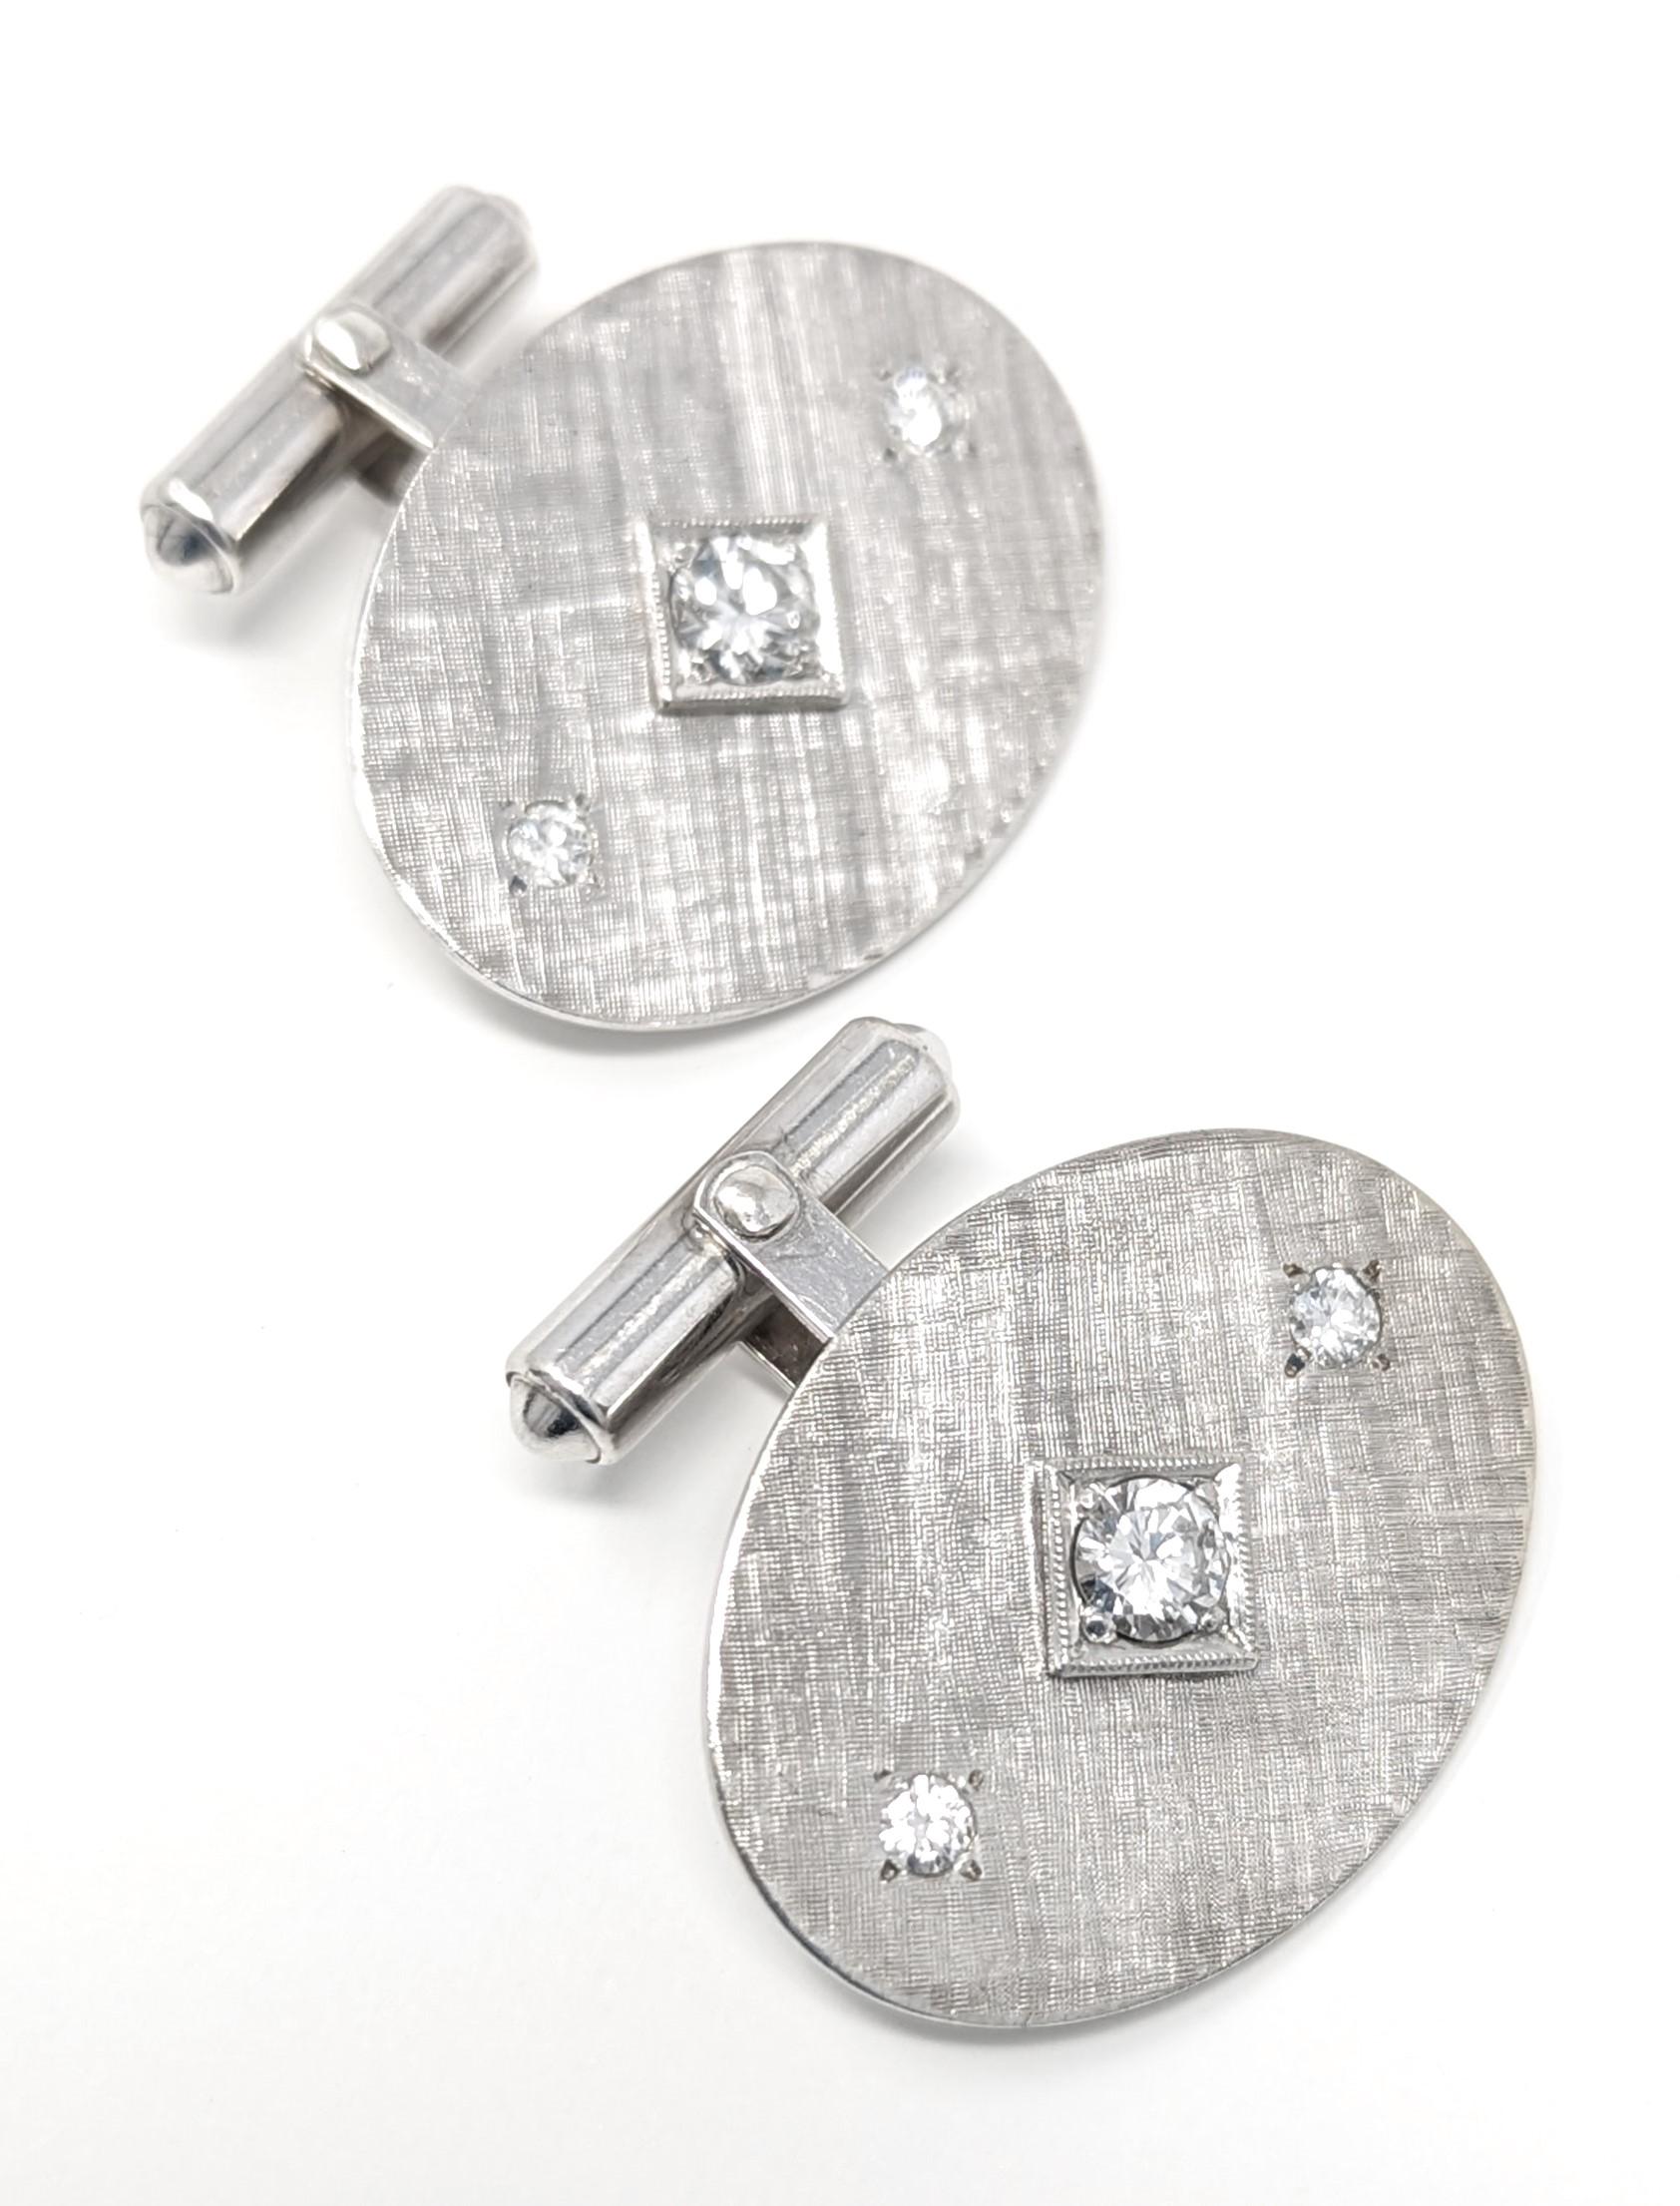 Vintage 14k Diamond Cufflinks Solid White Gold Oval Modernist Design Cuff Links In Good Condition For Sale In Greer, SC